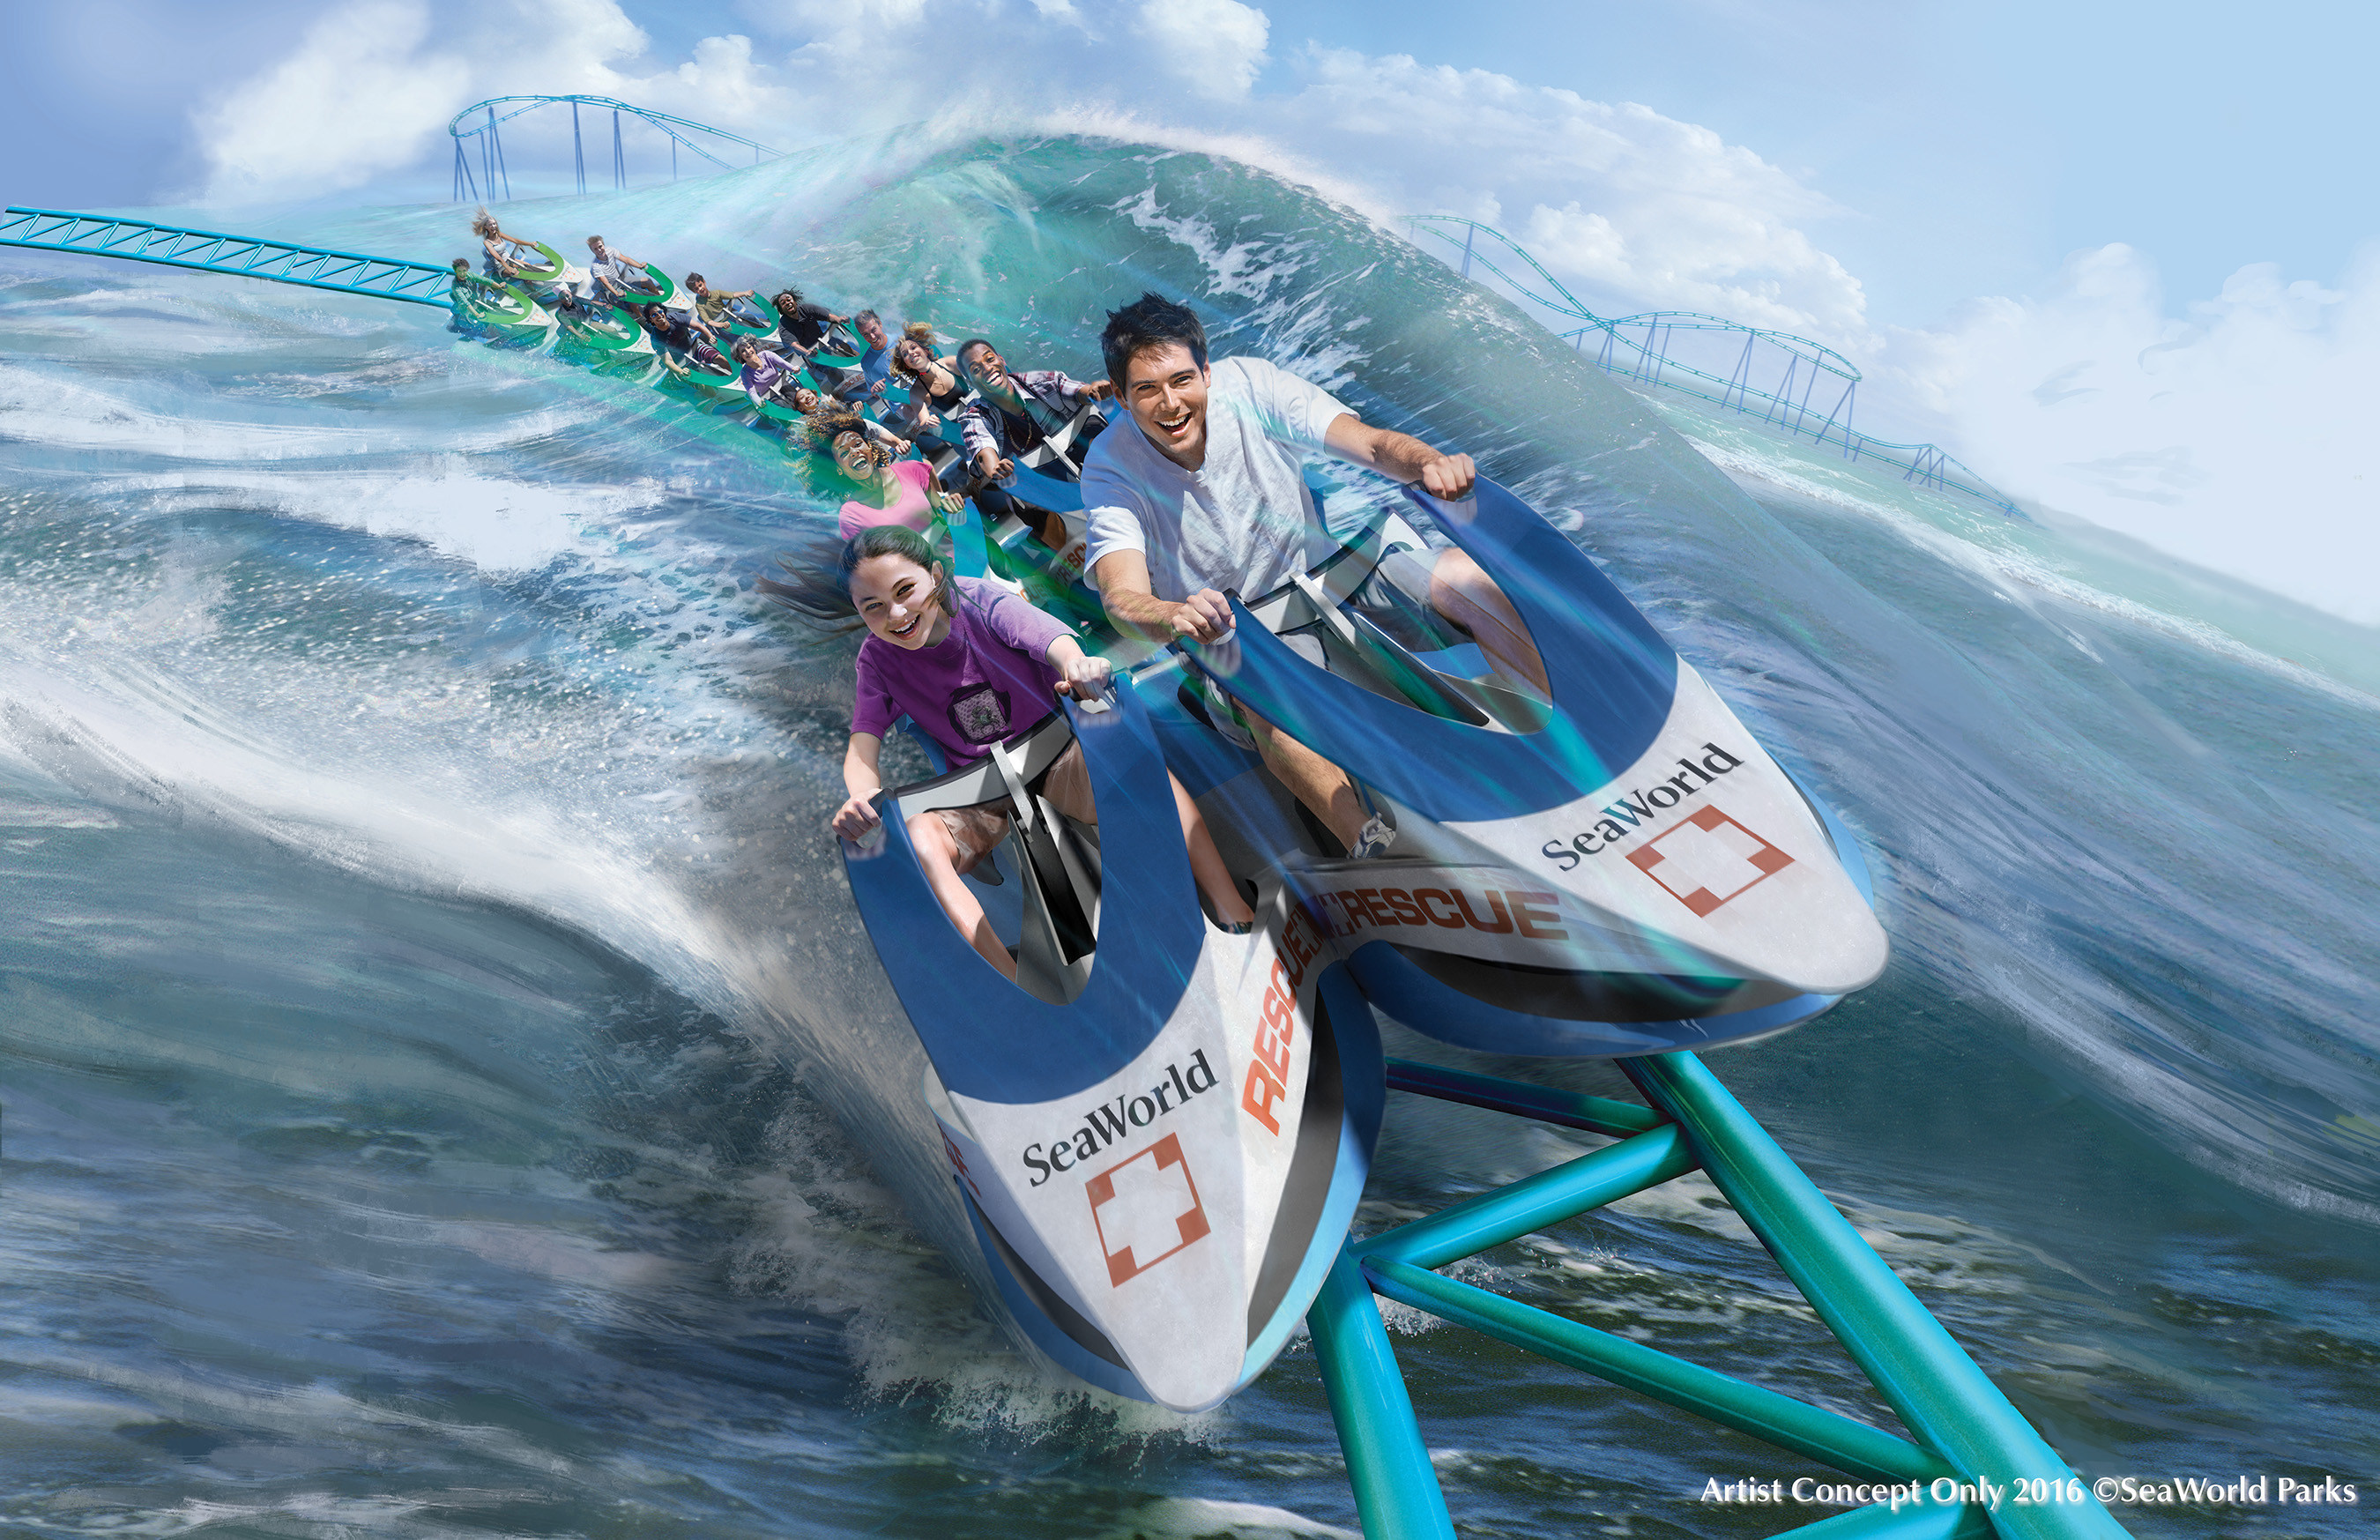 Wave Breaker: The Rescue Coaster(TM) will debut at SeaWorld San Antonio, summer 2017.  The unique jet ski-style car design, the first in North America, engages riders in a straddled seating position. Riders lean into a series of banked turns, racing over hills for maximum airtime and two high acceleration launches. Inspired by the Emmy(R) award-winning program, Sea Rescue(R), the coaster enables riders to feel what it's like to race alongside SeaWorld's heroic animal care team as they spring into action at a moment's notice to help rescue animals in distress.  Credit: Artist Concept Only - 2016 (C)SeaWorld Parks